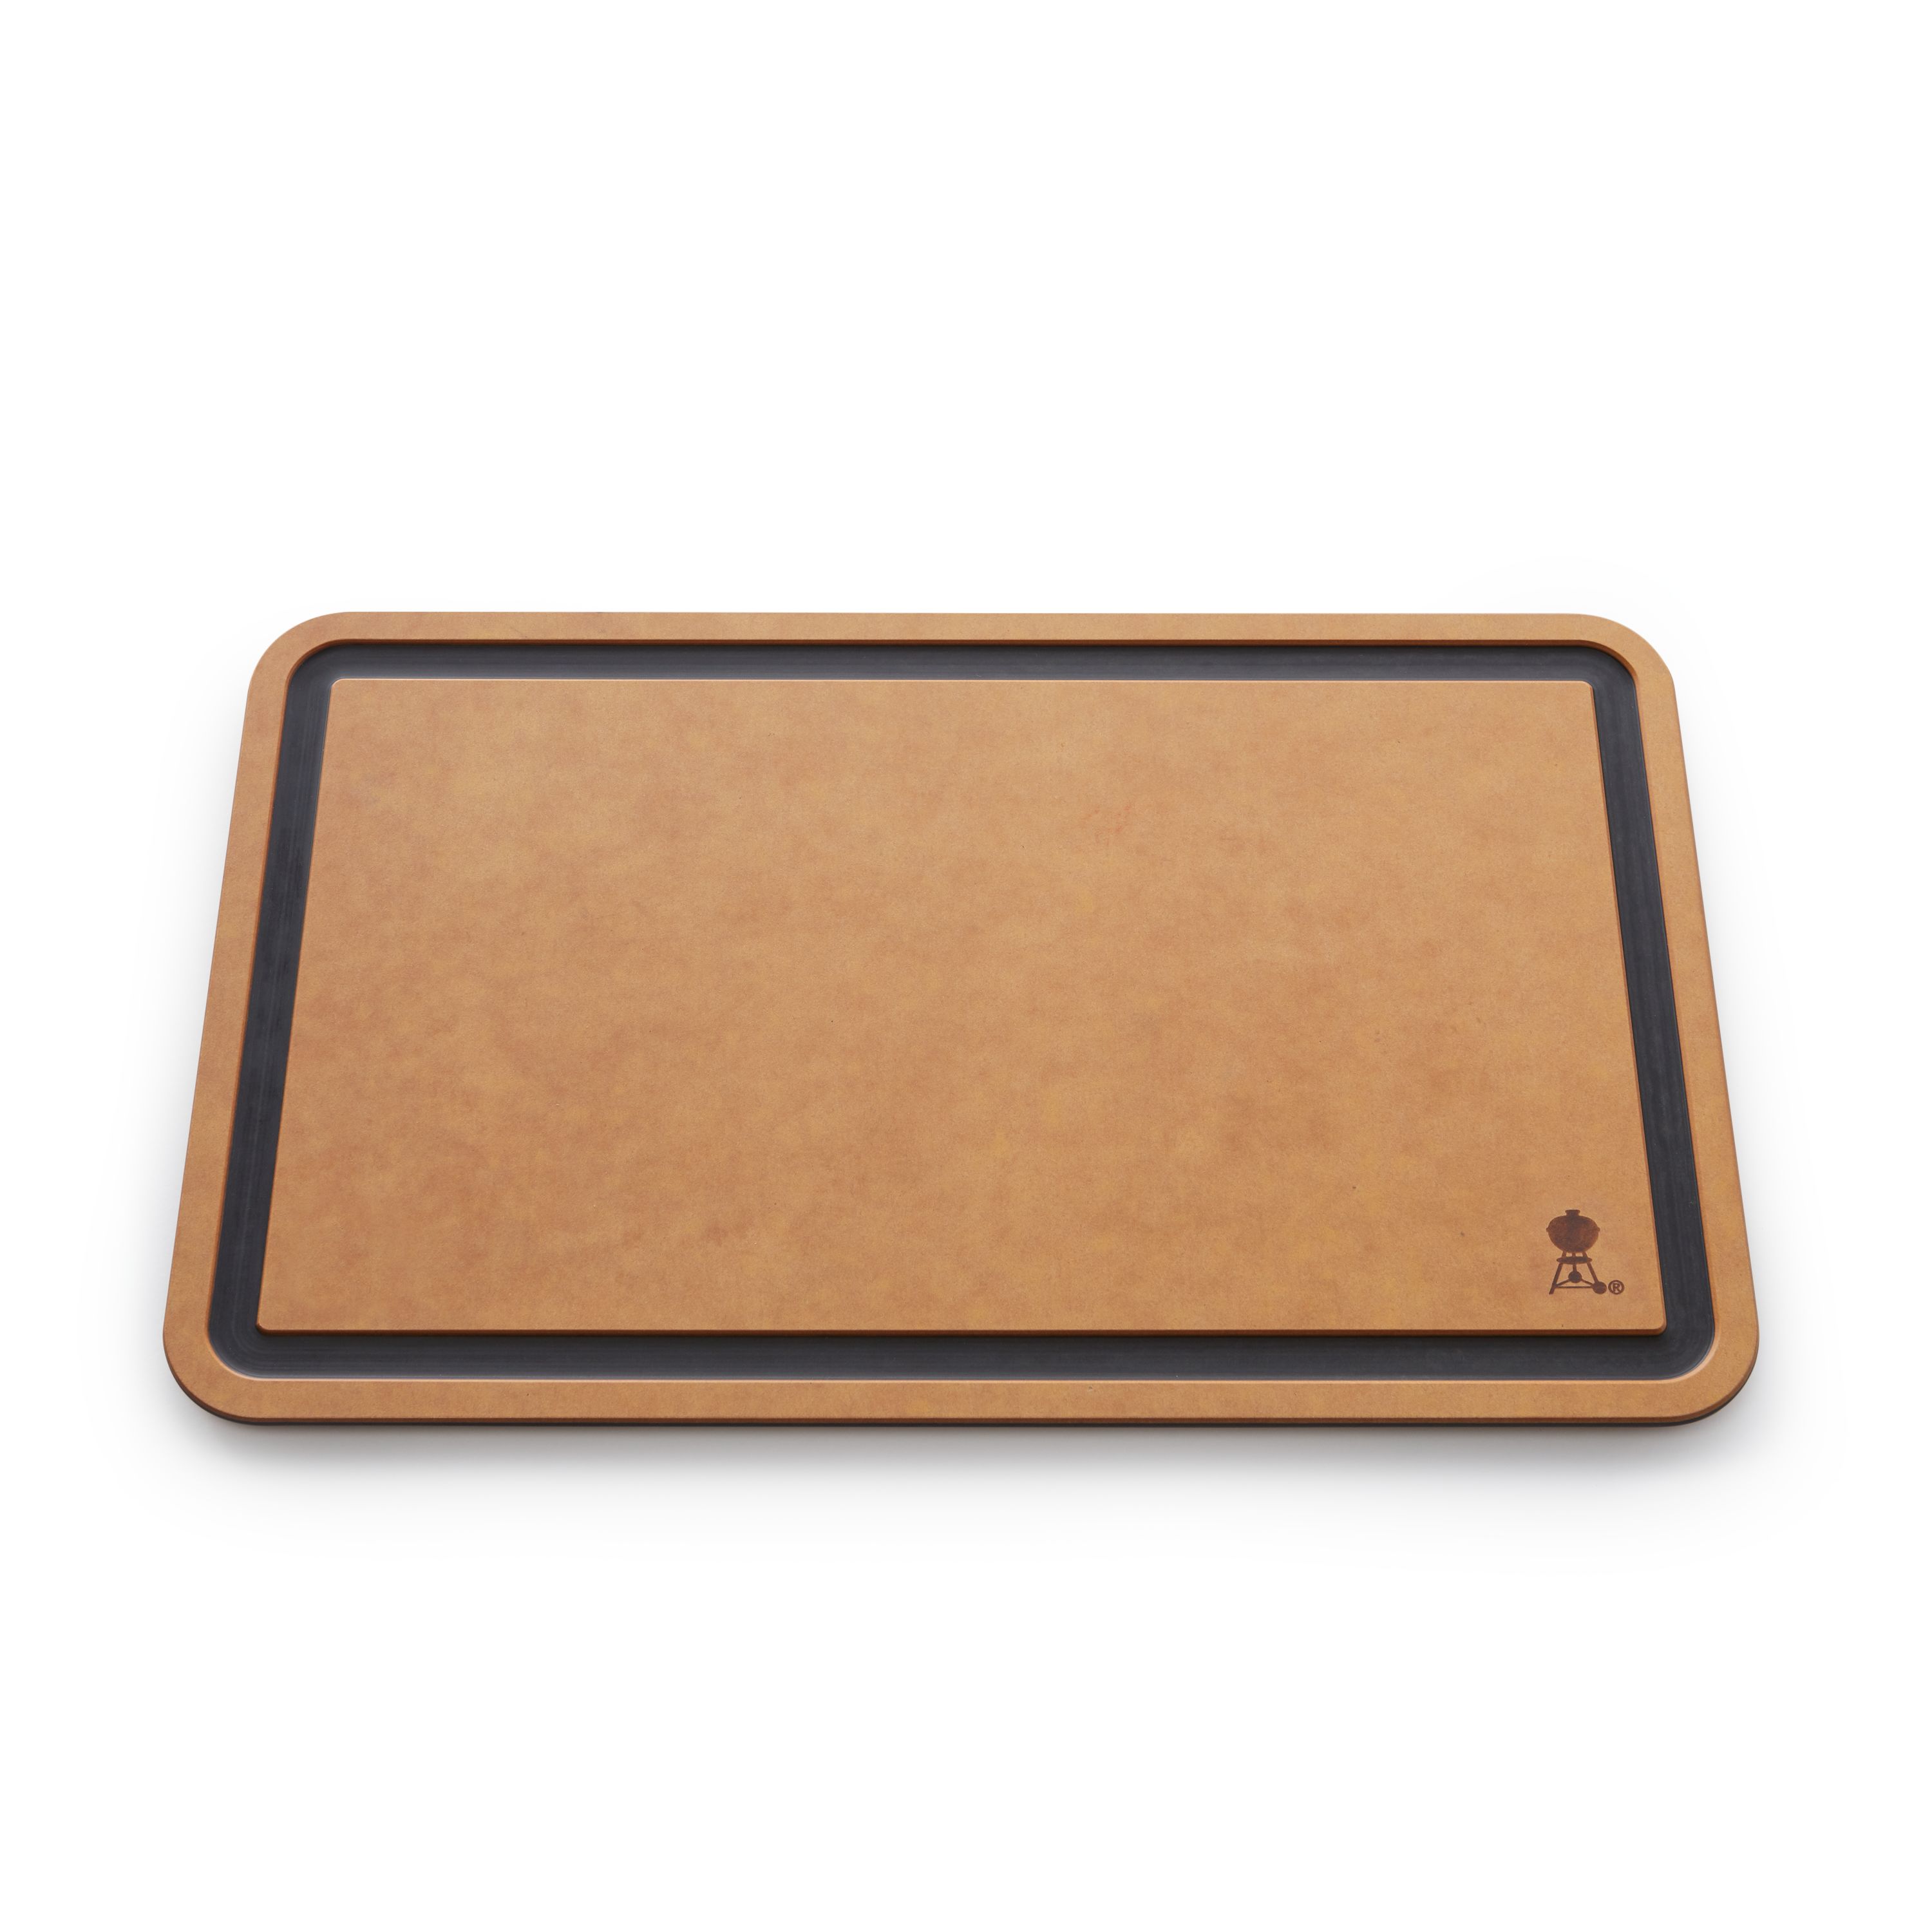 Los Angeles Dodgers Home Plate Cutting Boards